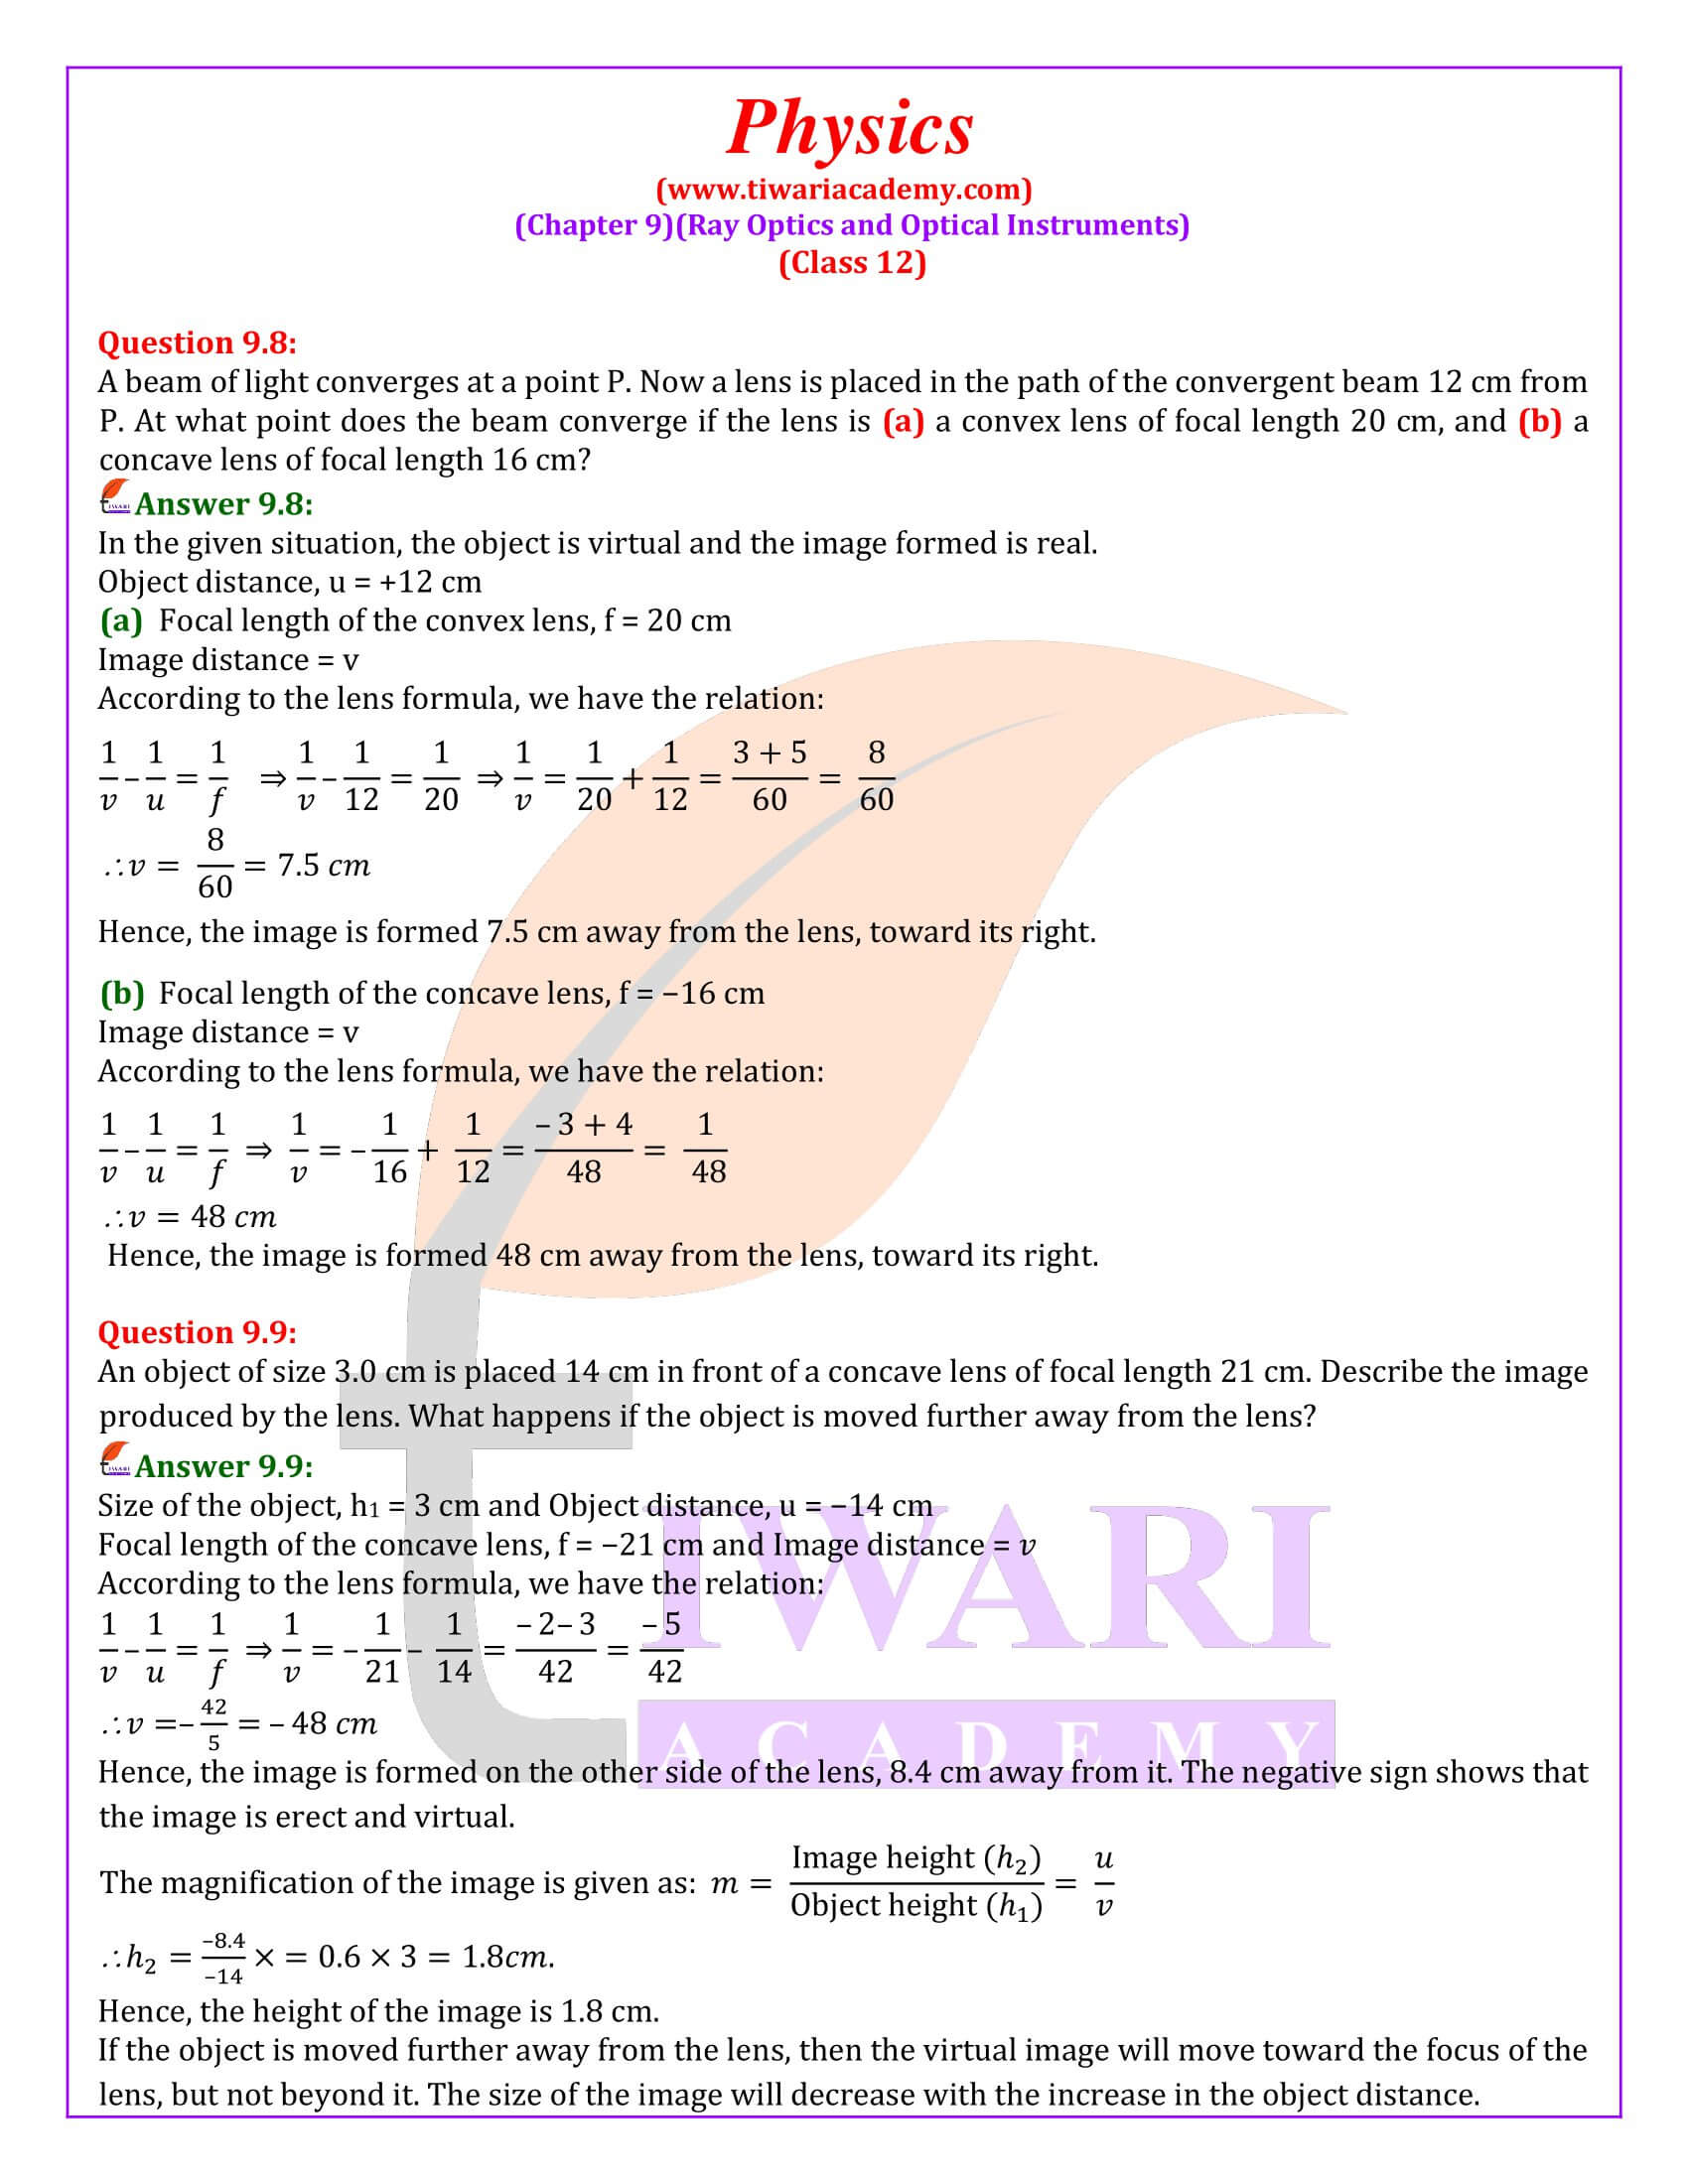 NCERT Solutions for Class 12 Physics Chapter 9 revised for new session